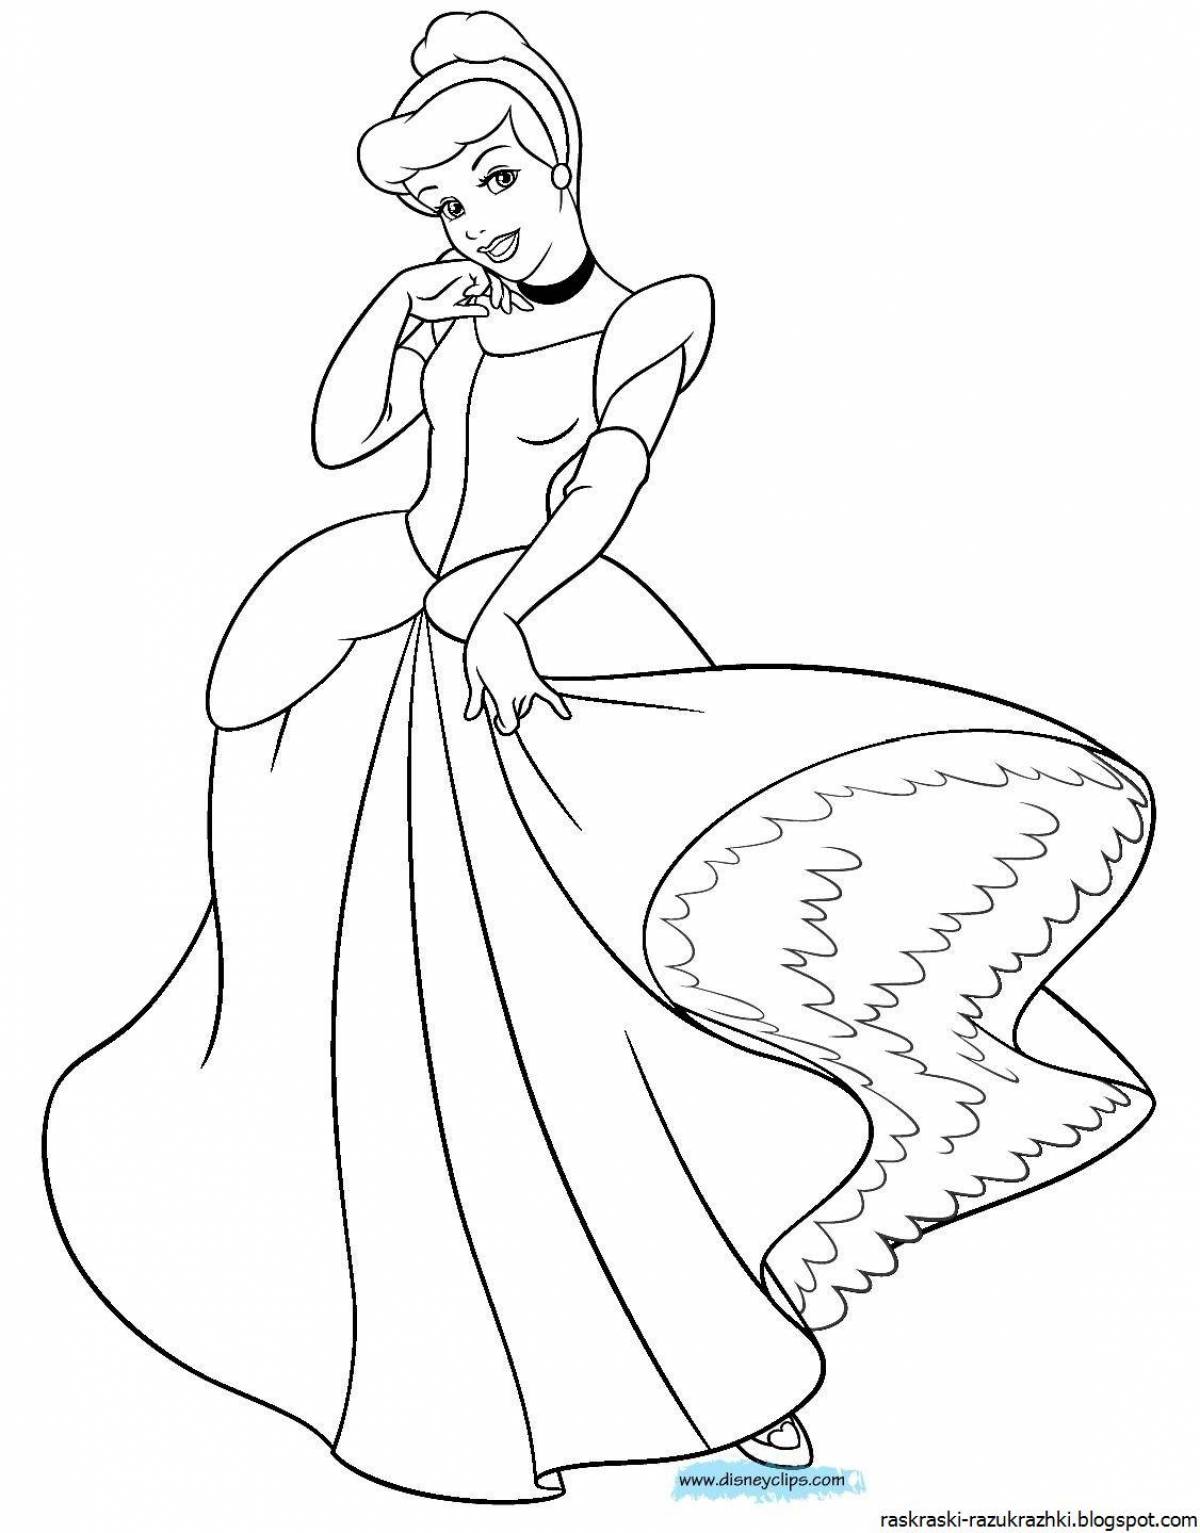 Shining Cinderella coloring pages for kids